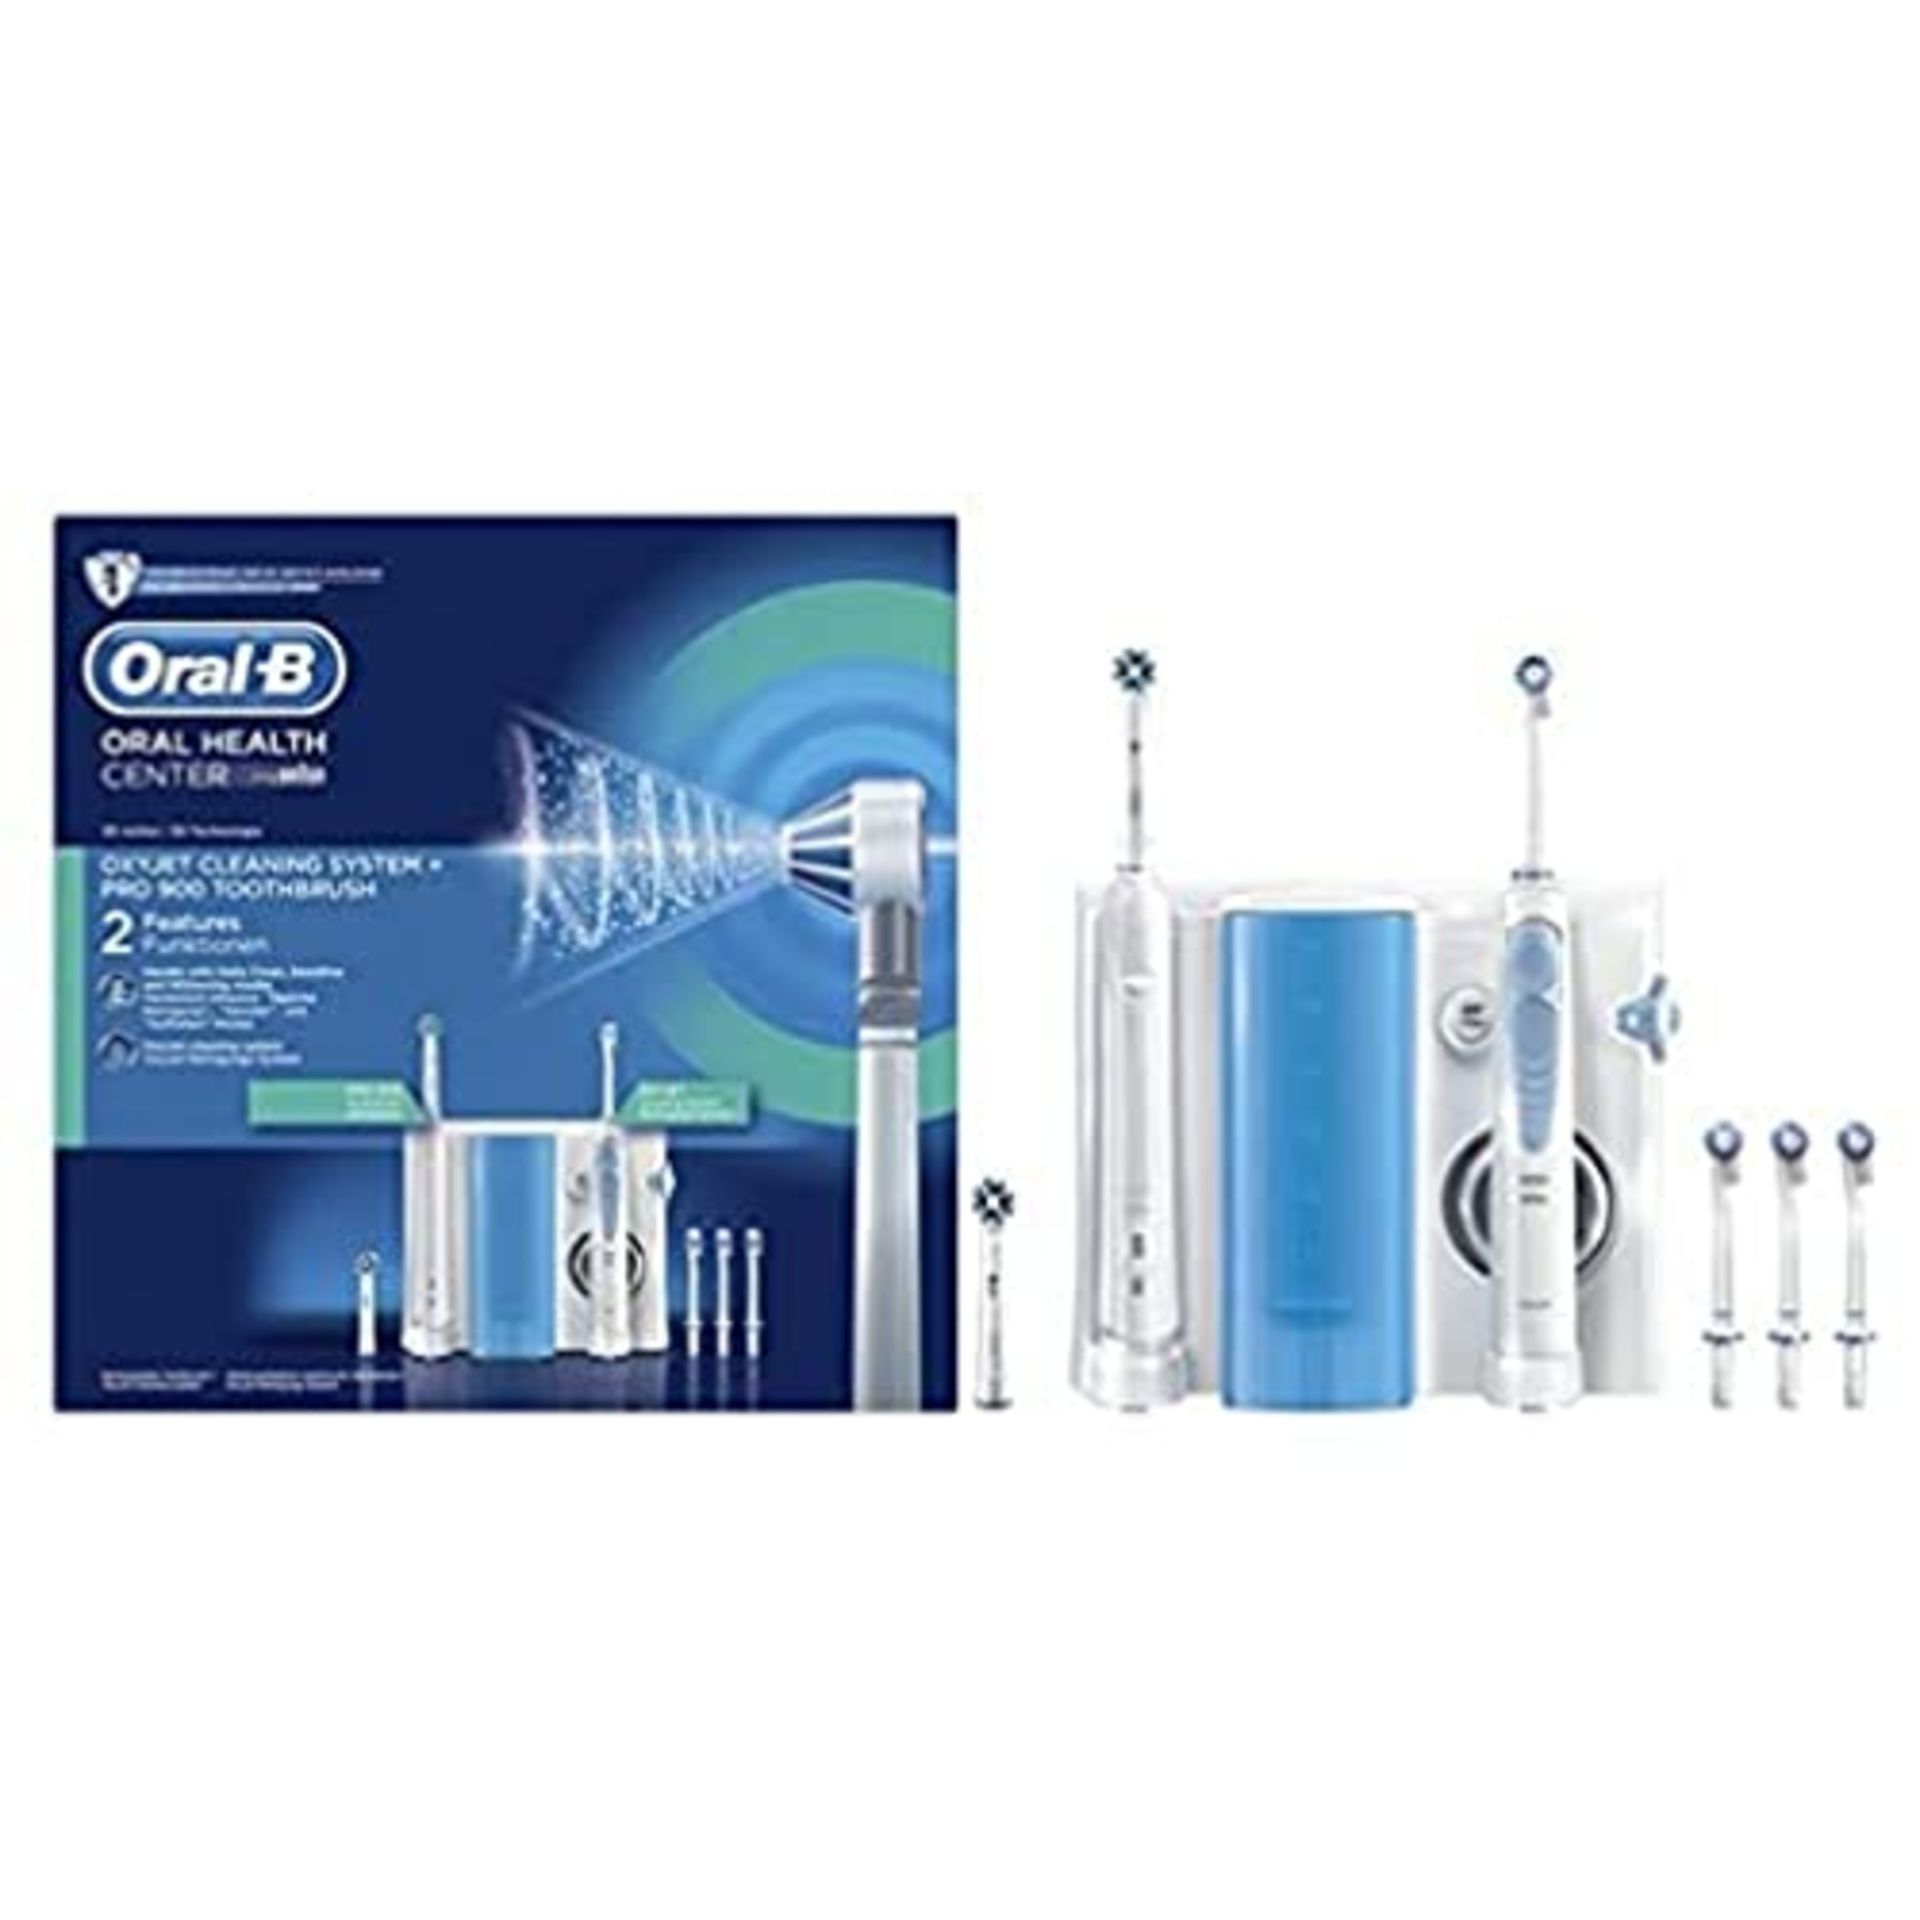 RRP £109.00 Oral-B Oral Health Center Oxyjet Cleaning System + Pro 900 Toothbrush